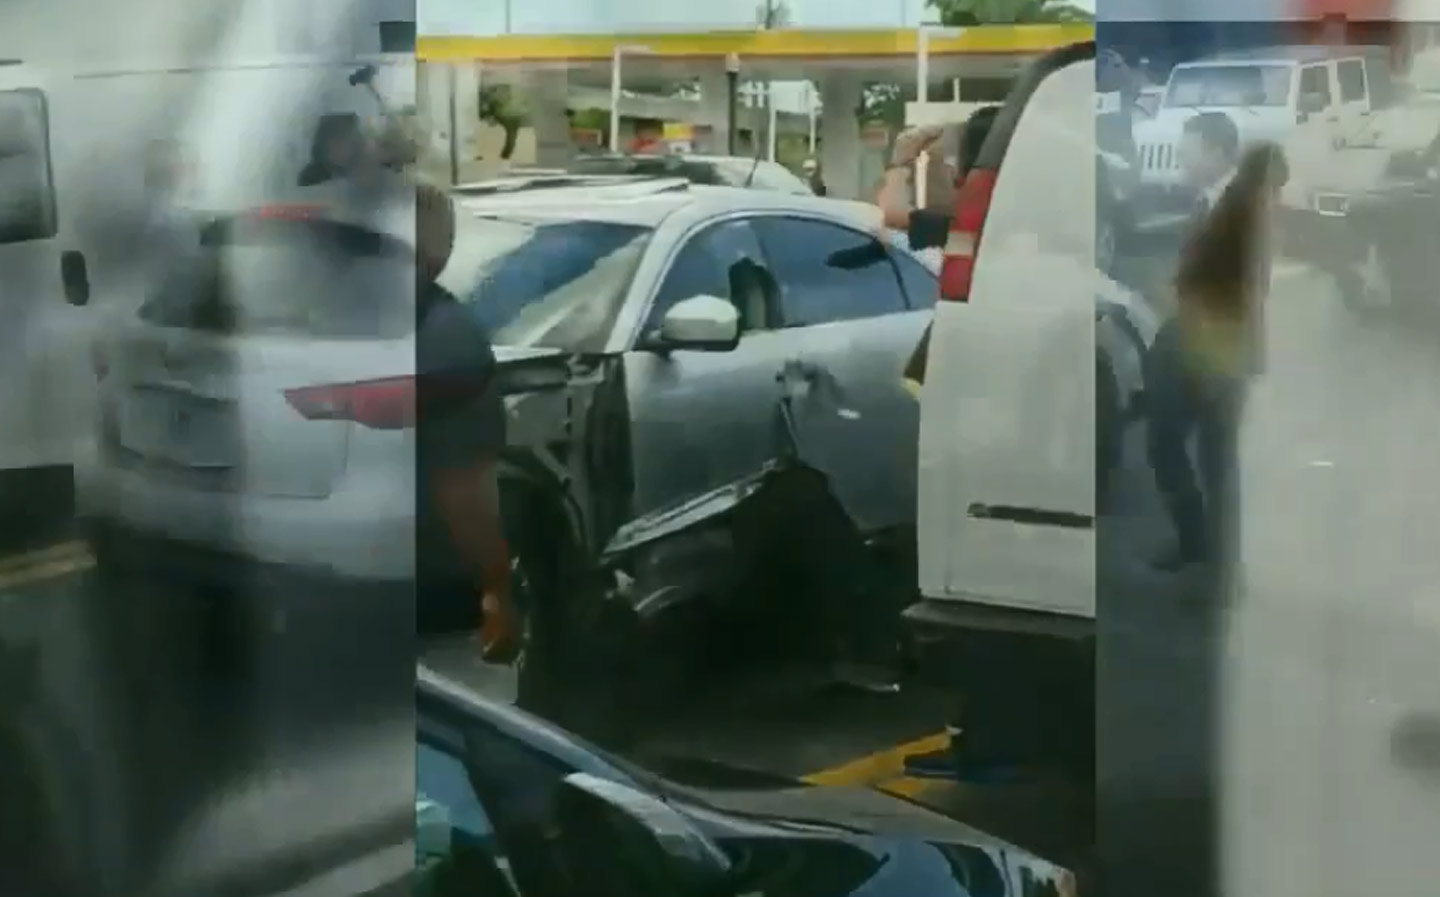 Man smashes SUV windows with sledgehammer after hit-and-run